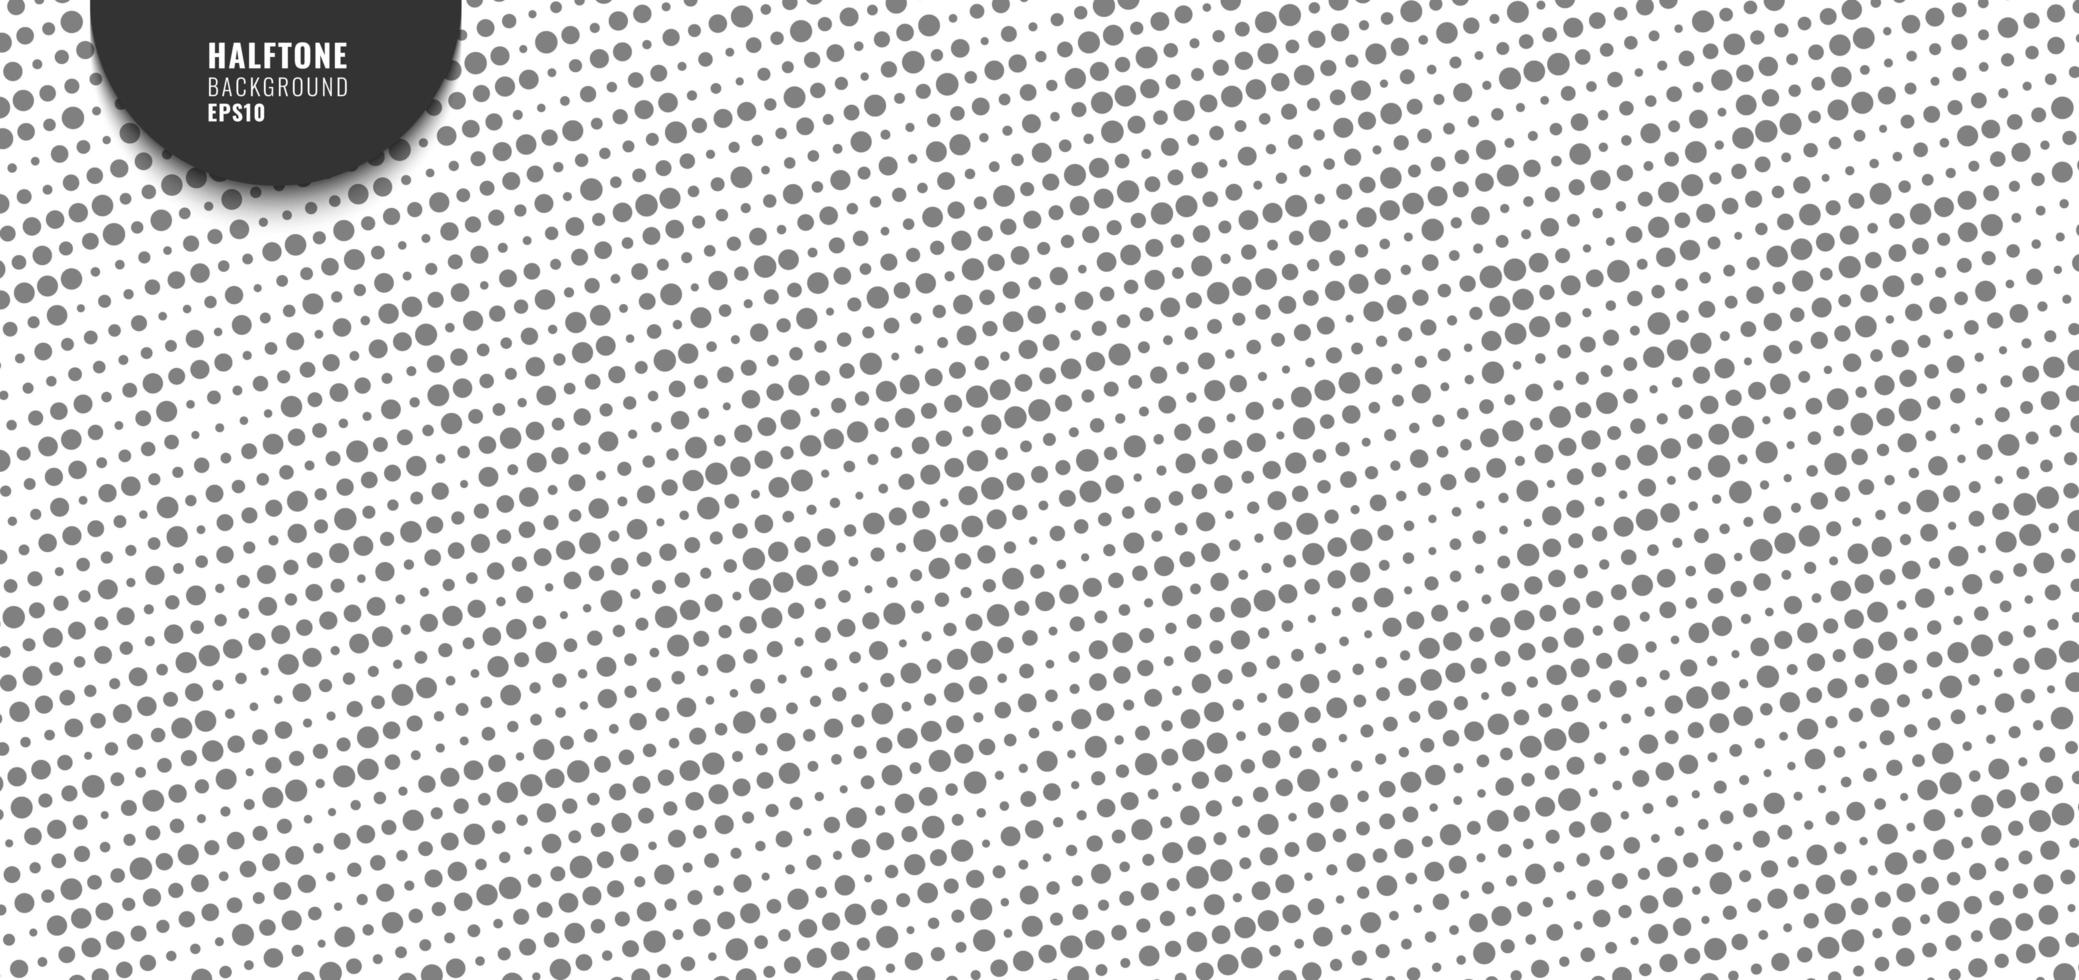 Abstract simple gray random dotted pattern vector